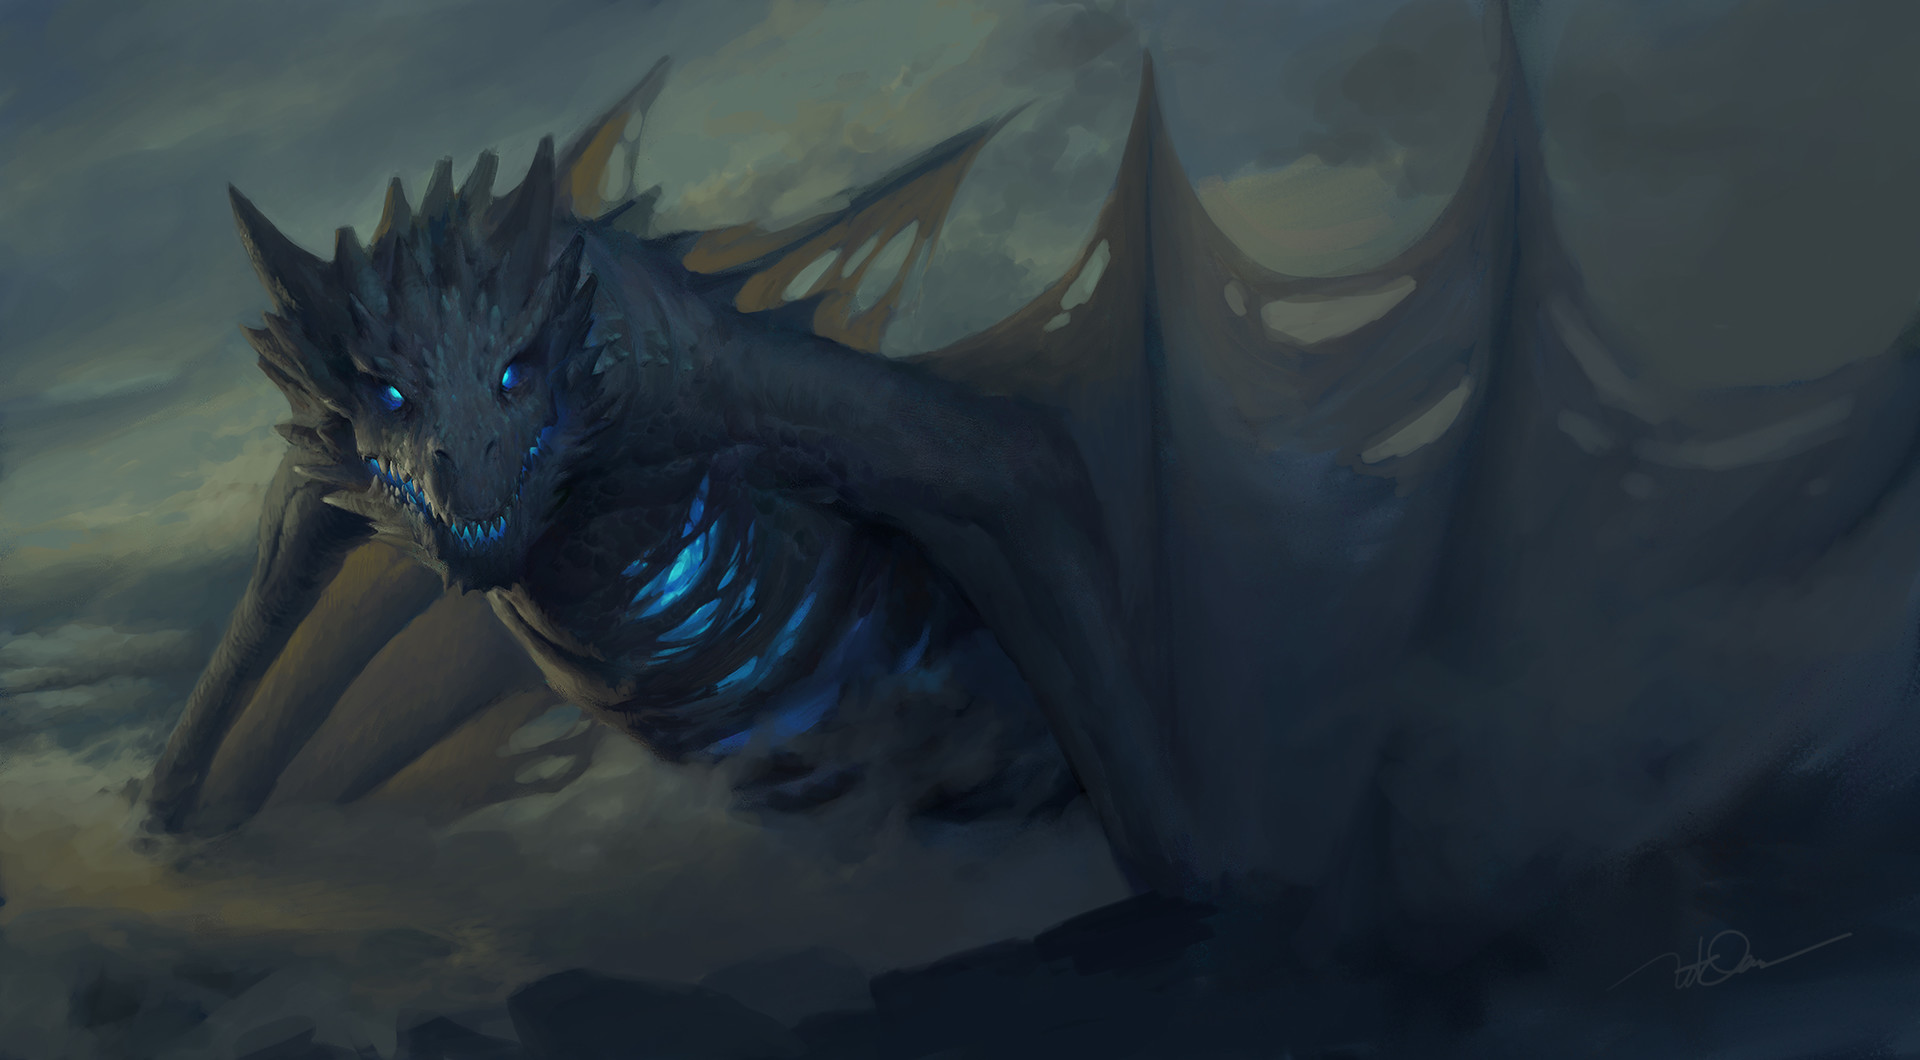 Undead Viserion by Dao Trong Le